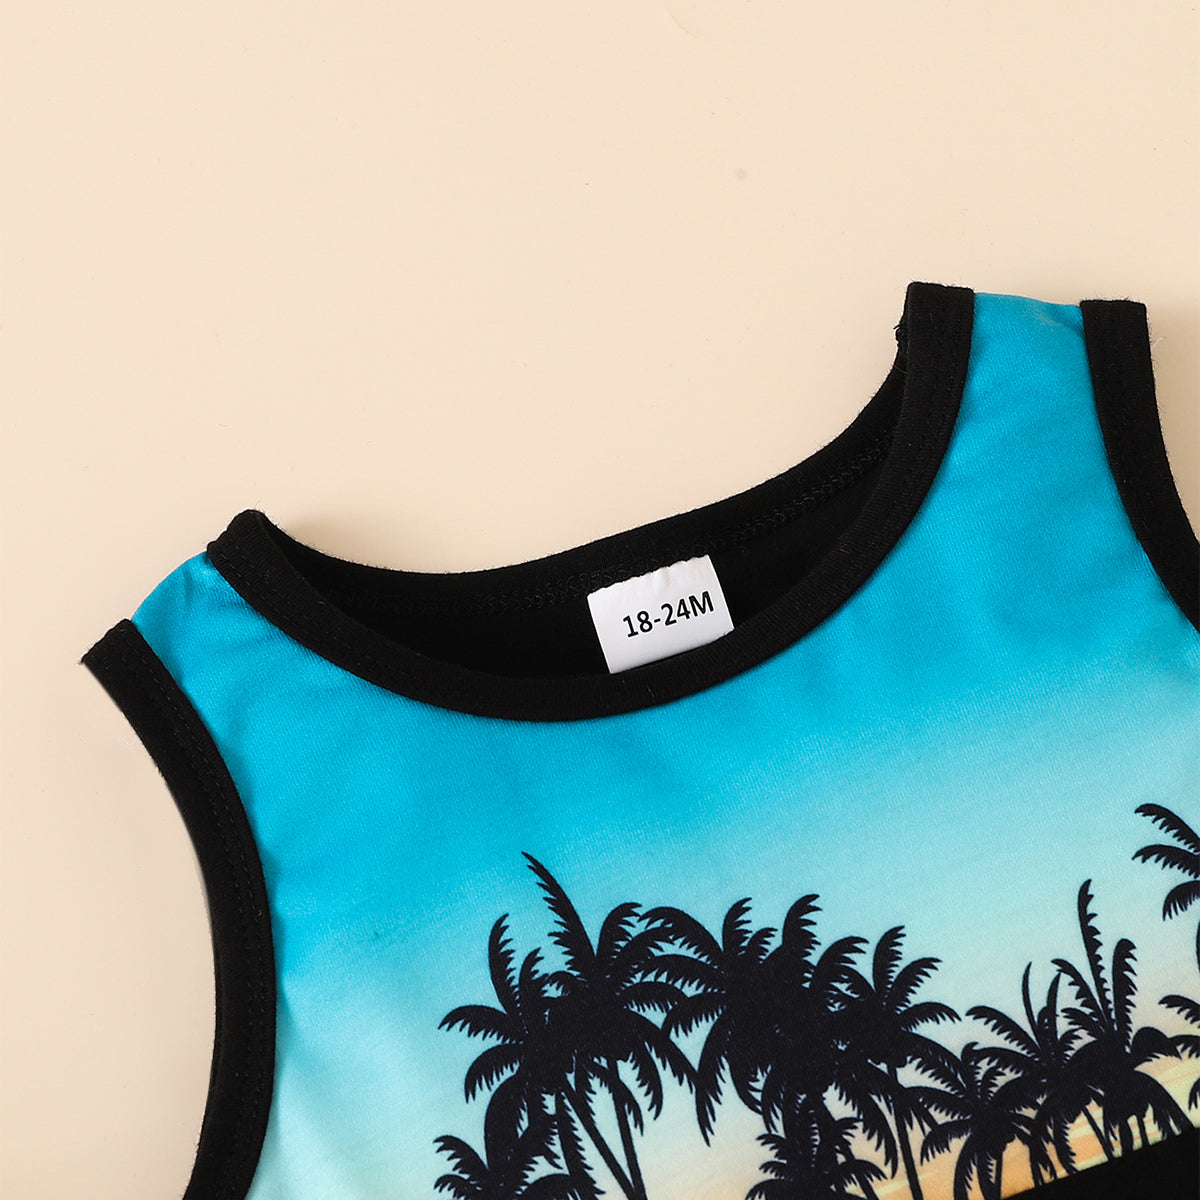 Kids Graphic Tank and Short Set